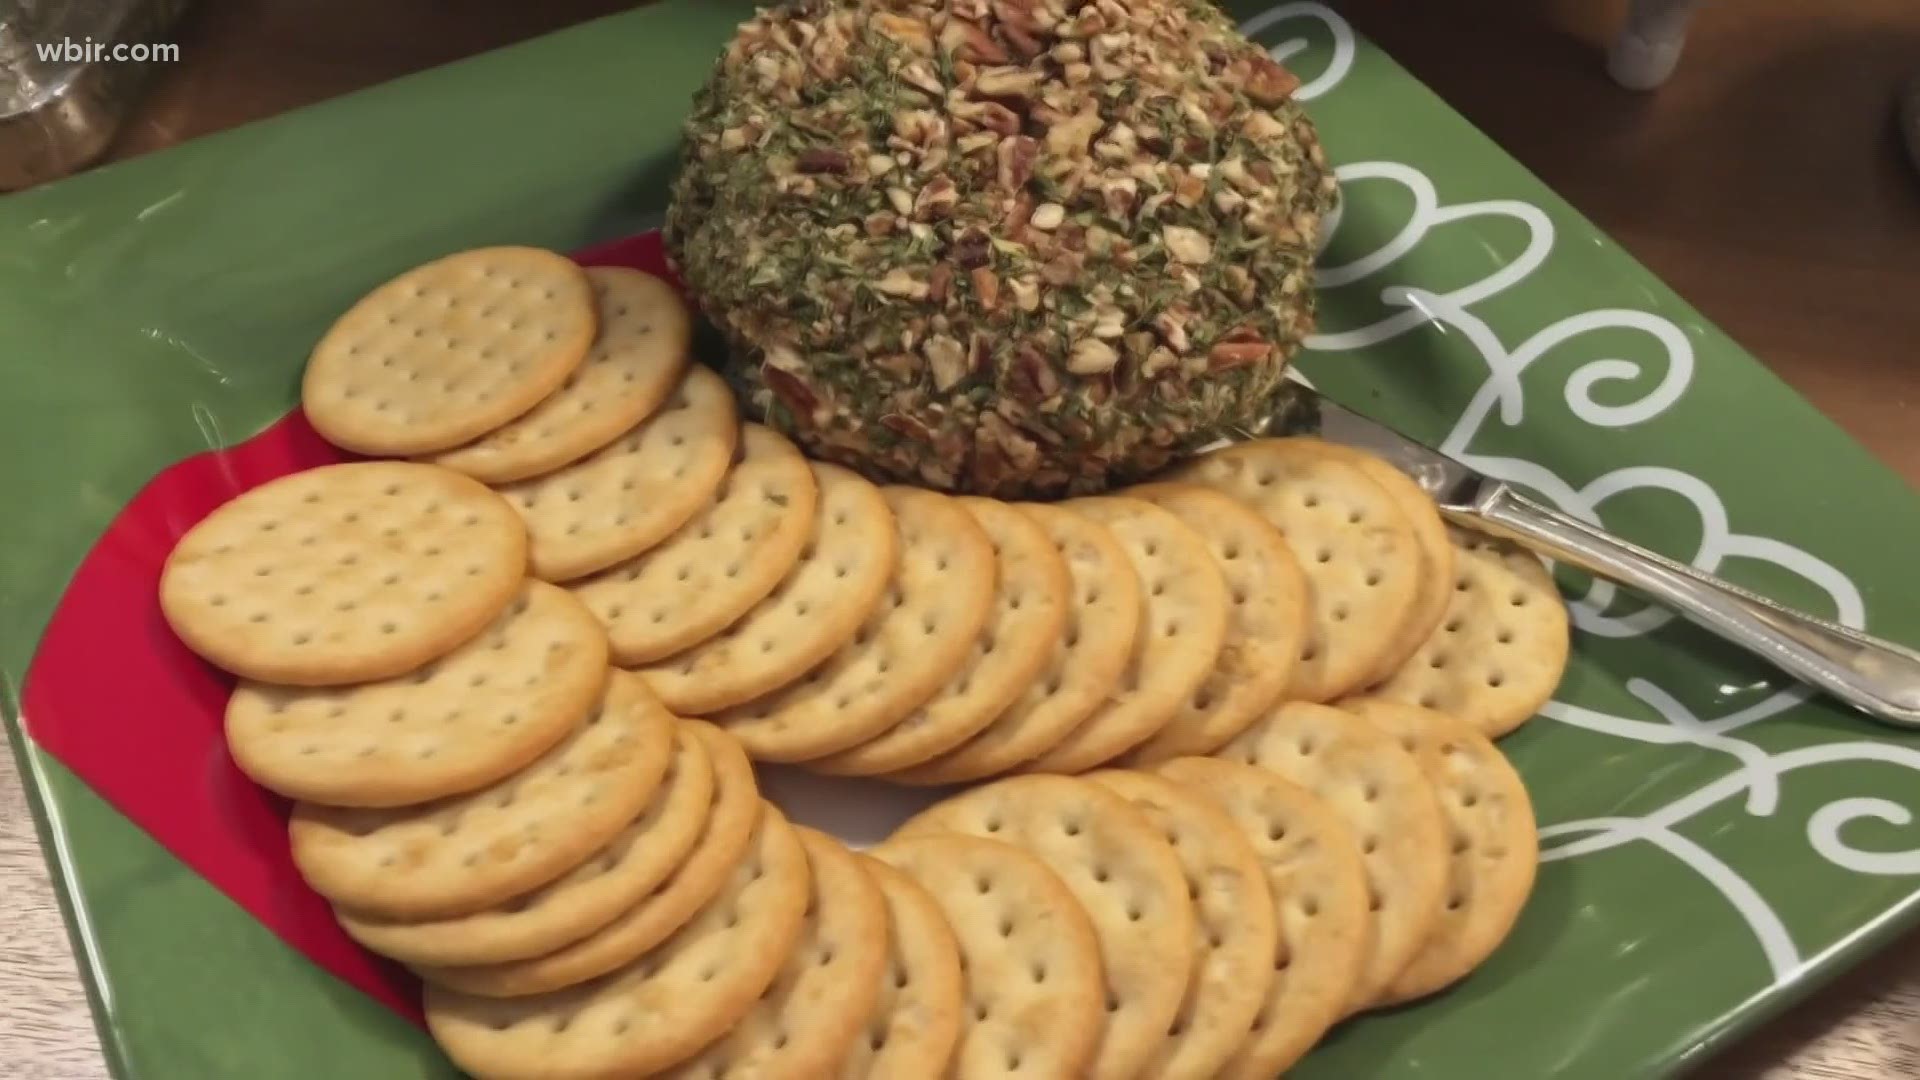 Joy McCabe shares her recipe for the perfect holiday cheese ball that your whole family will love.